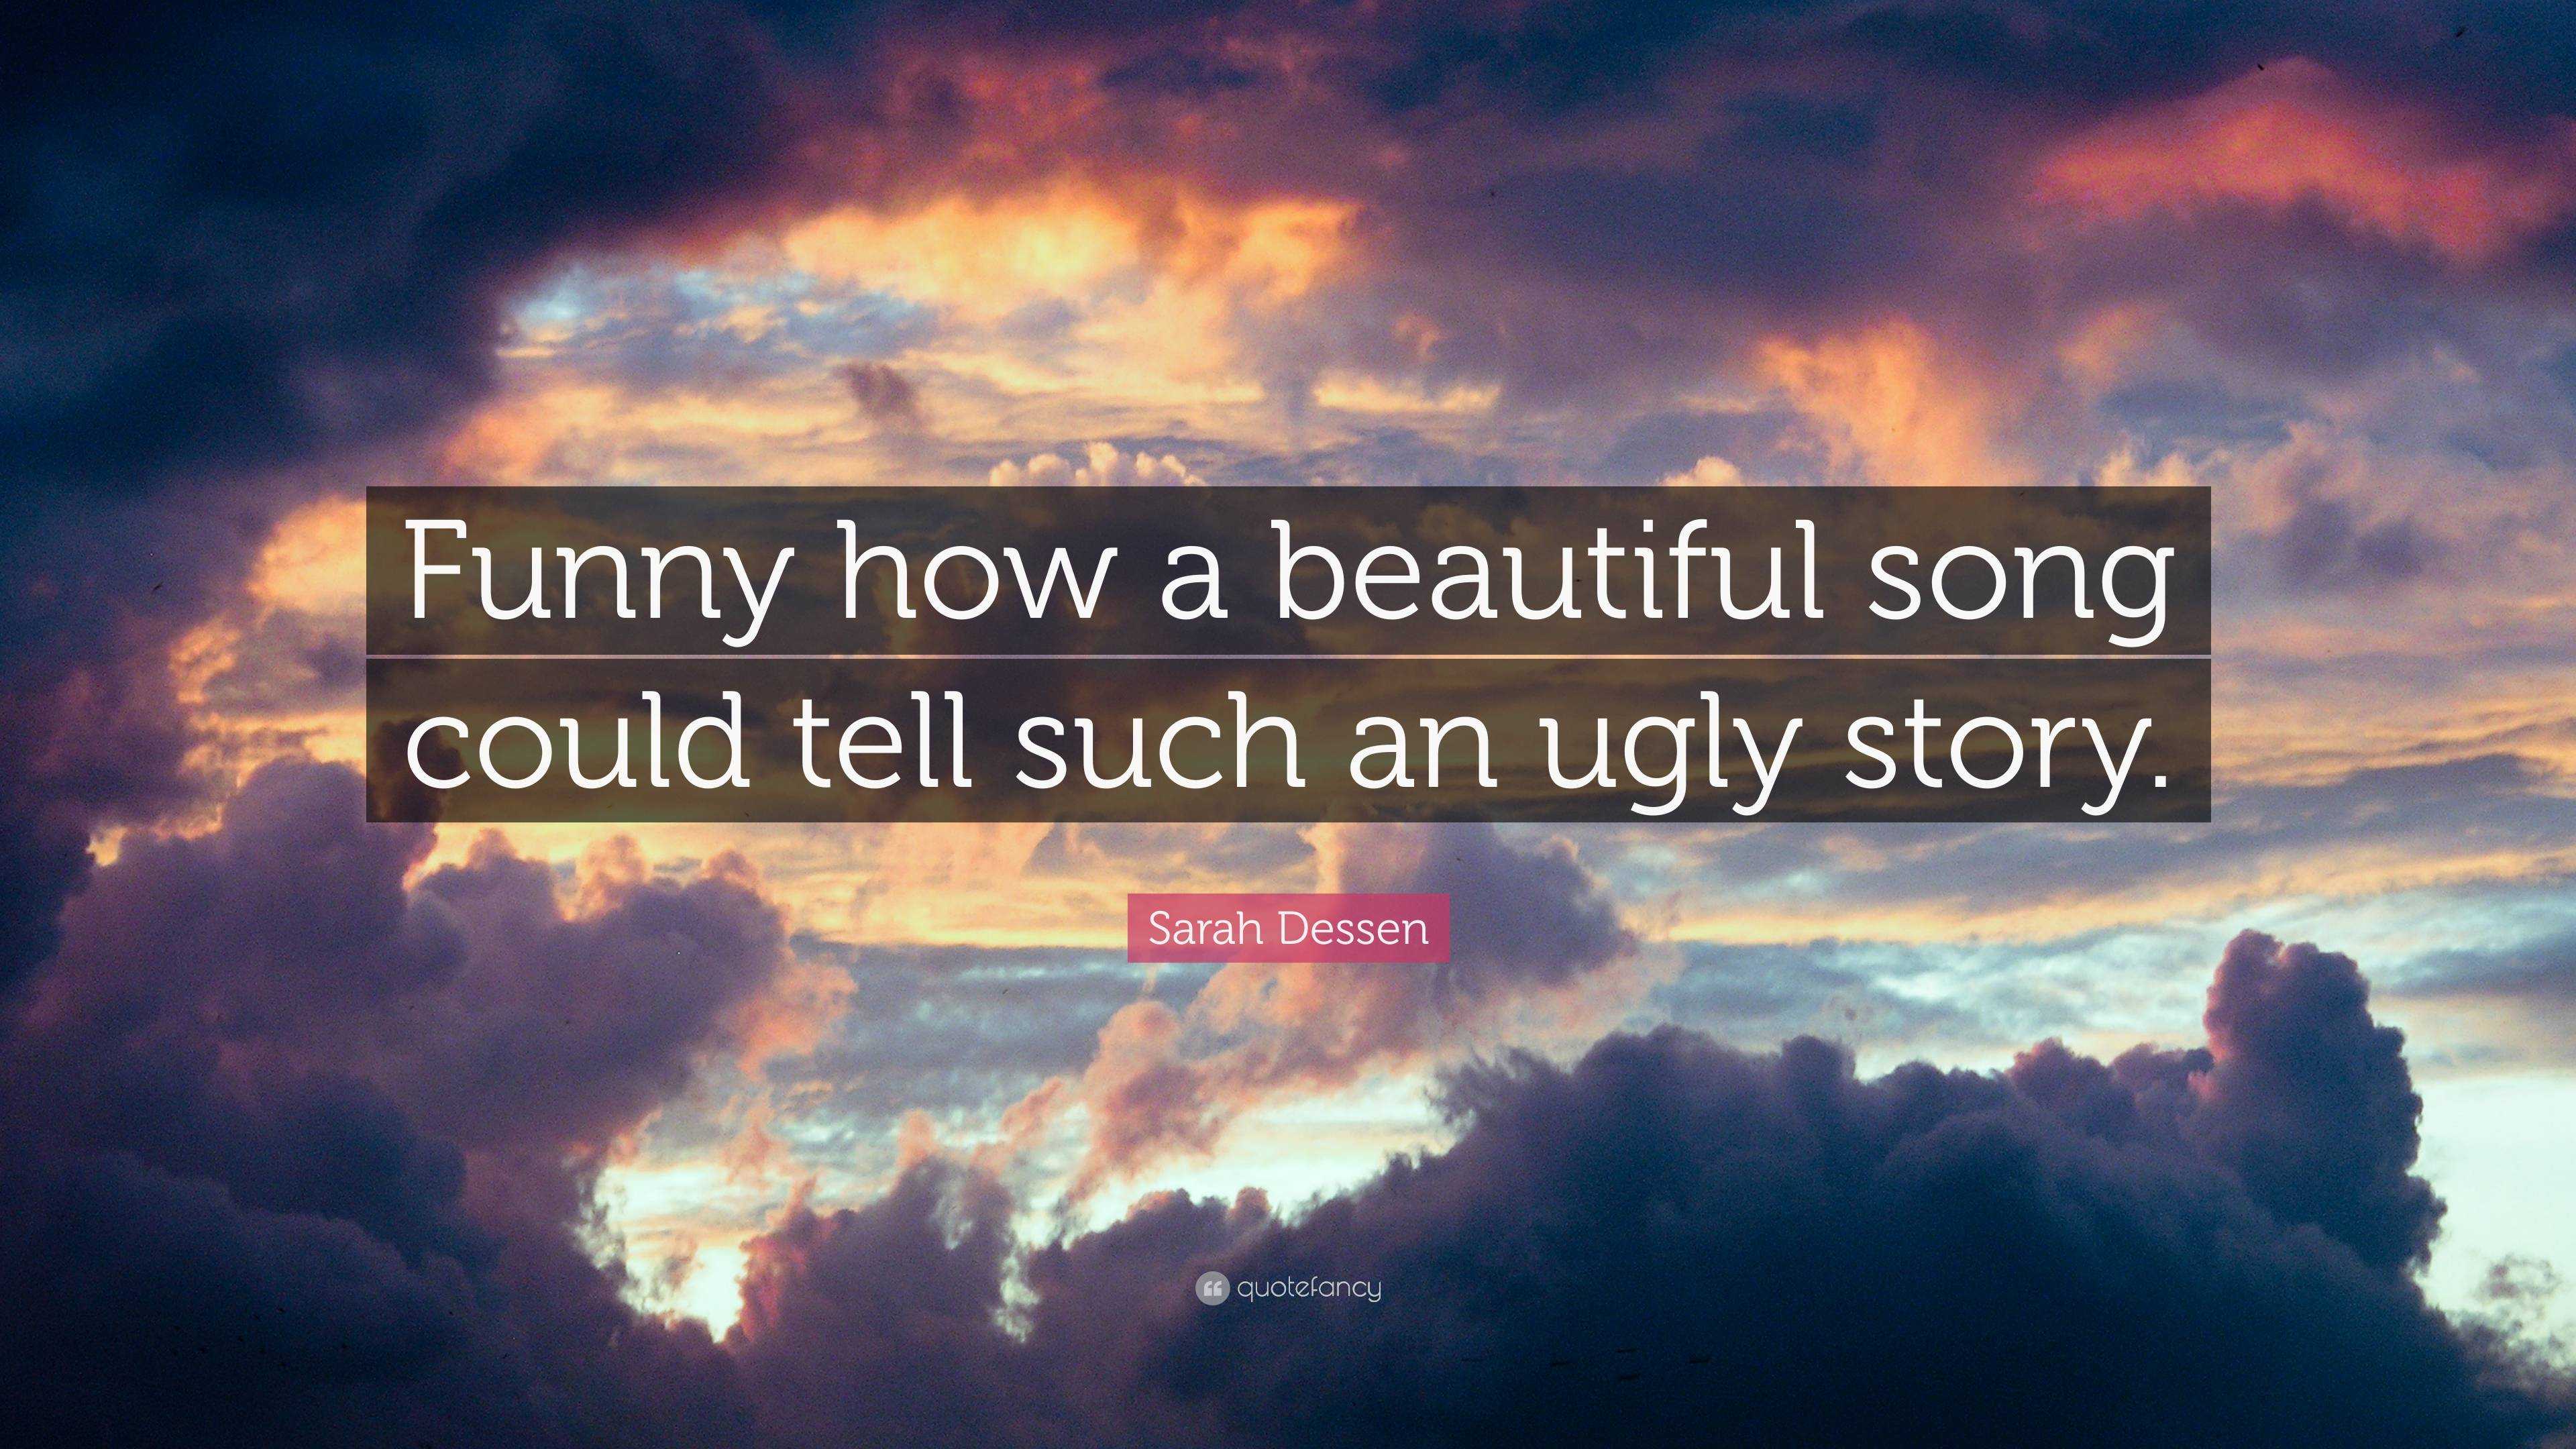 Sarah Dessen Quote: “Funny how a beautiful song could tell such an ugly  story.”